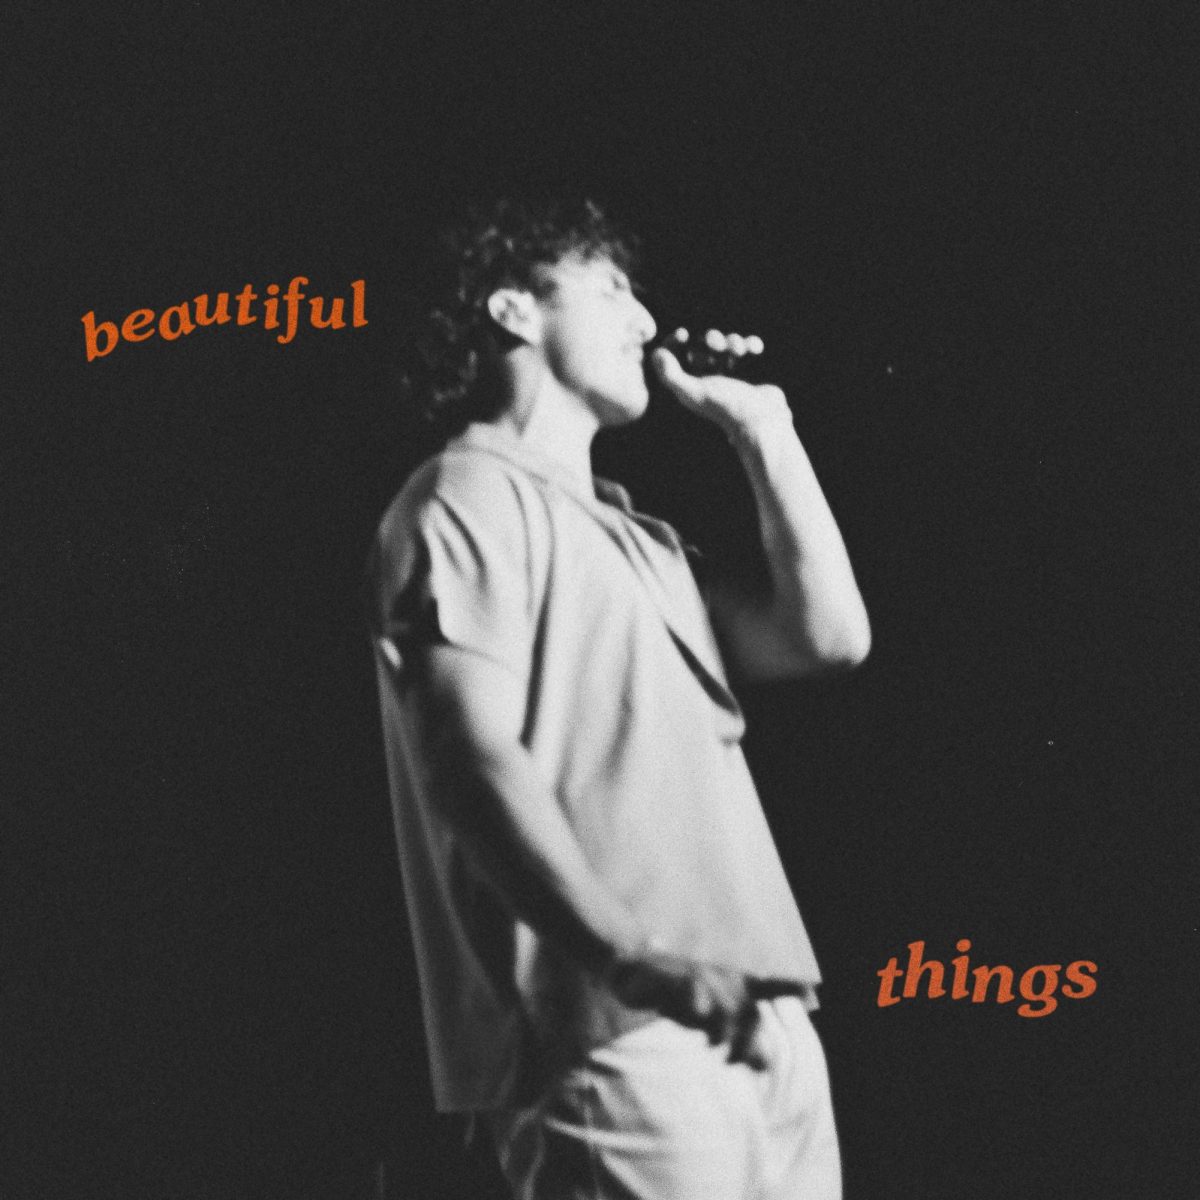 Benson Boone released his latest single on January 18. The song Beautiful Things captures the range of emotions one feels when in love from the joy of finding the one to the anxiety of fearing youll lose them.